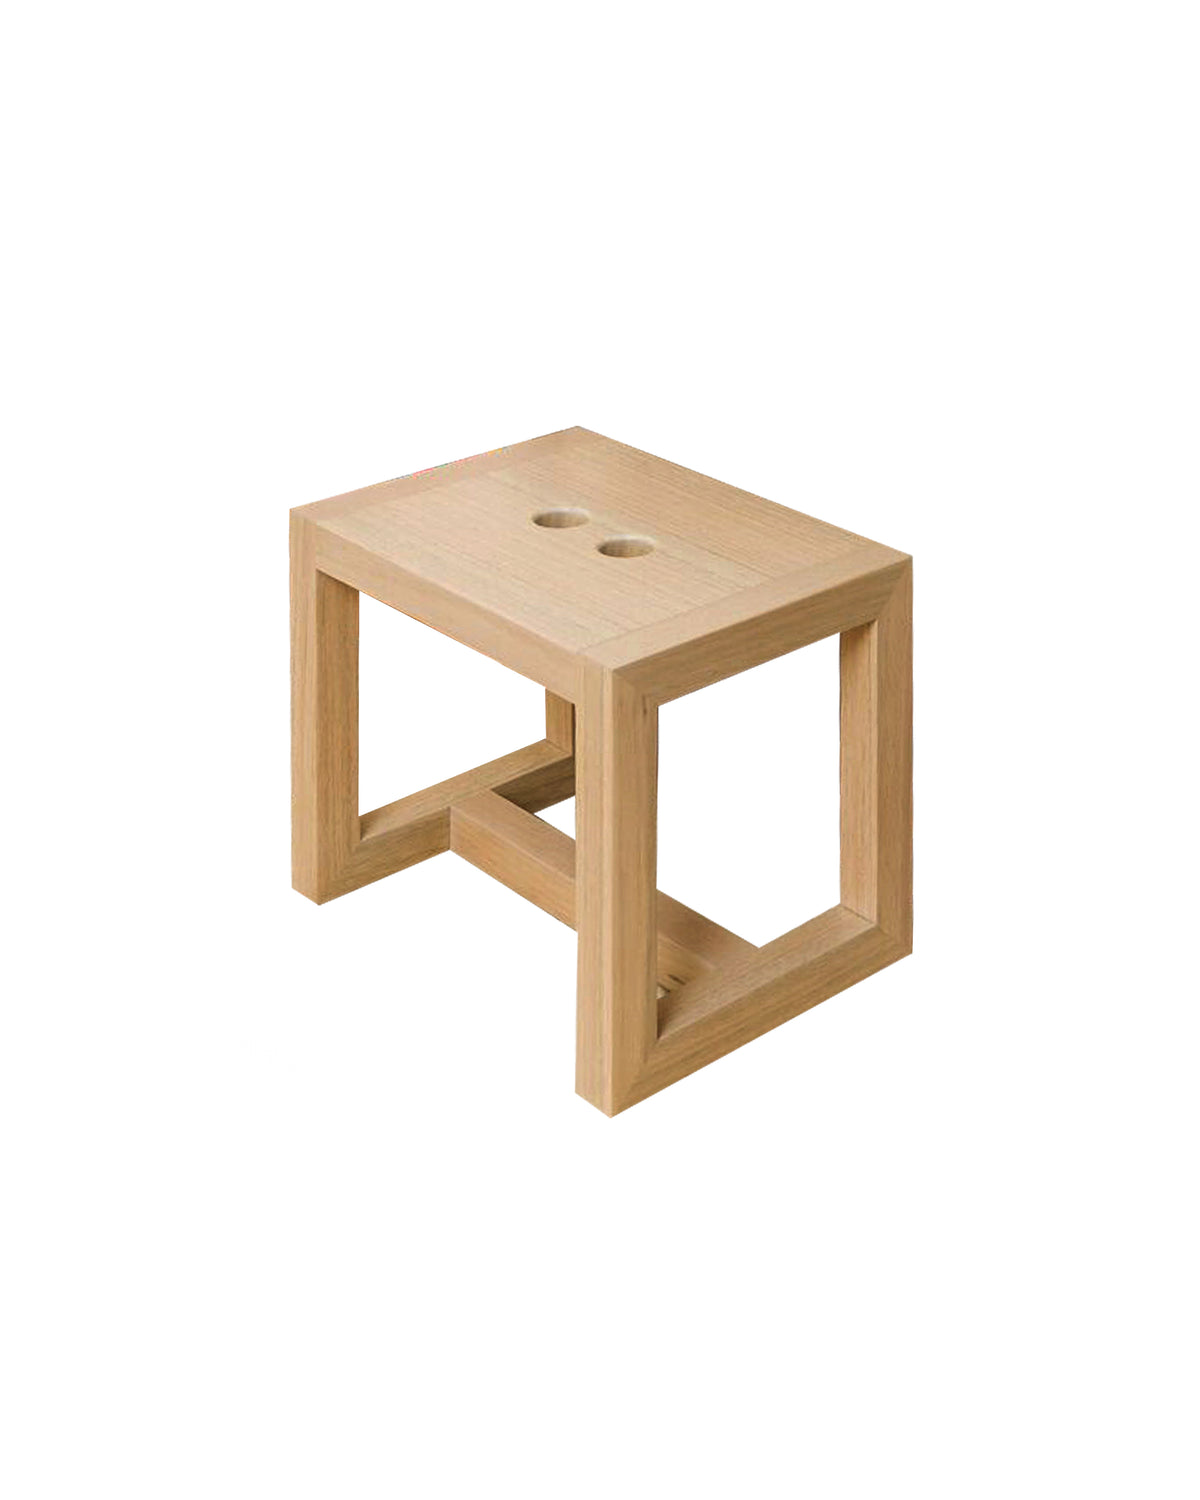 These handy little stools are perfect for the play room or even for meal times! Made from solid oak and available in either Tasmanian Oak or Whitewash finish.  Stools: 36cmW x 25cmD x 29cmH